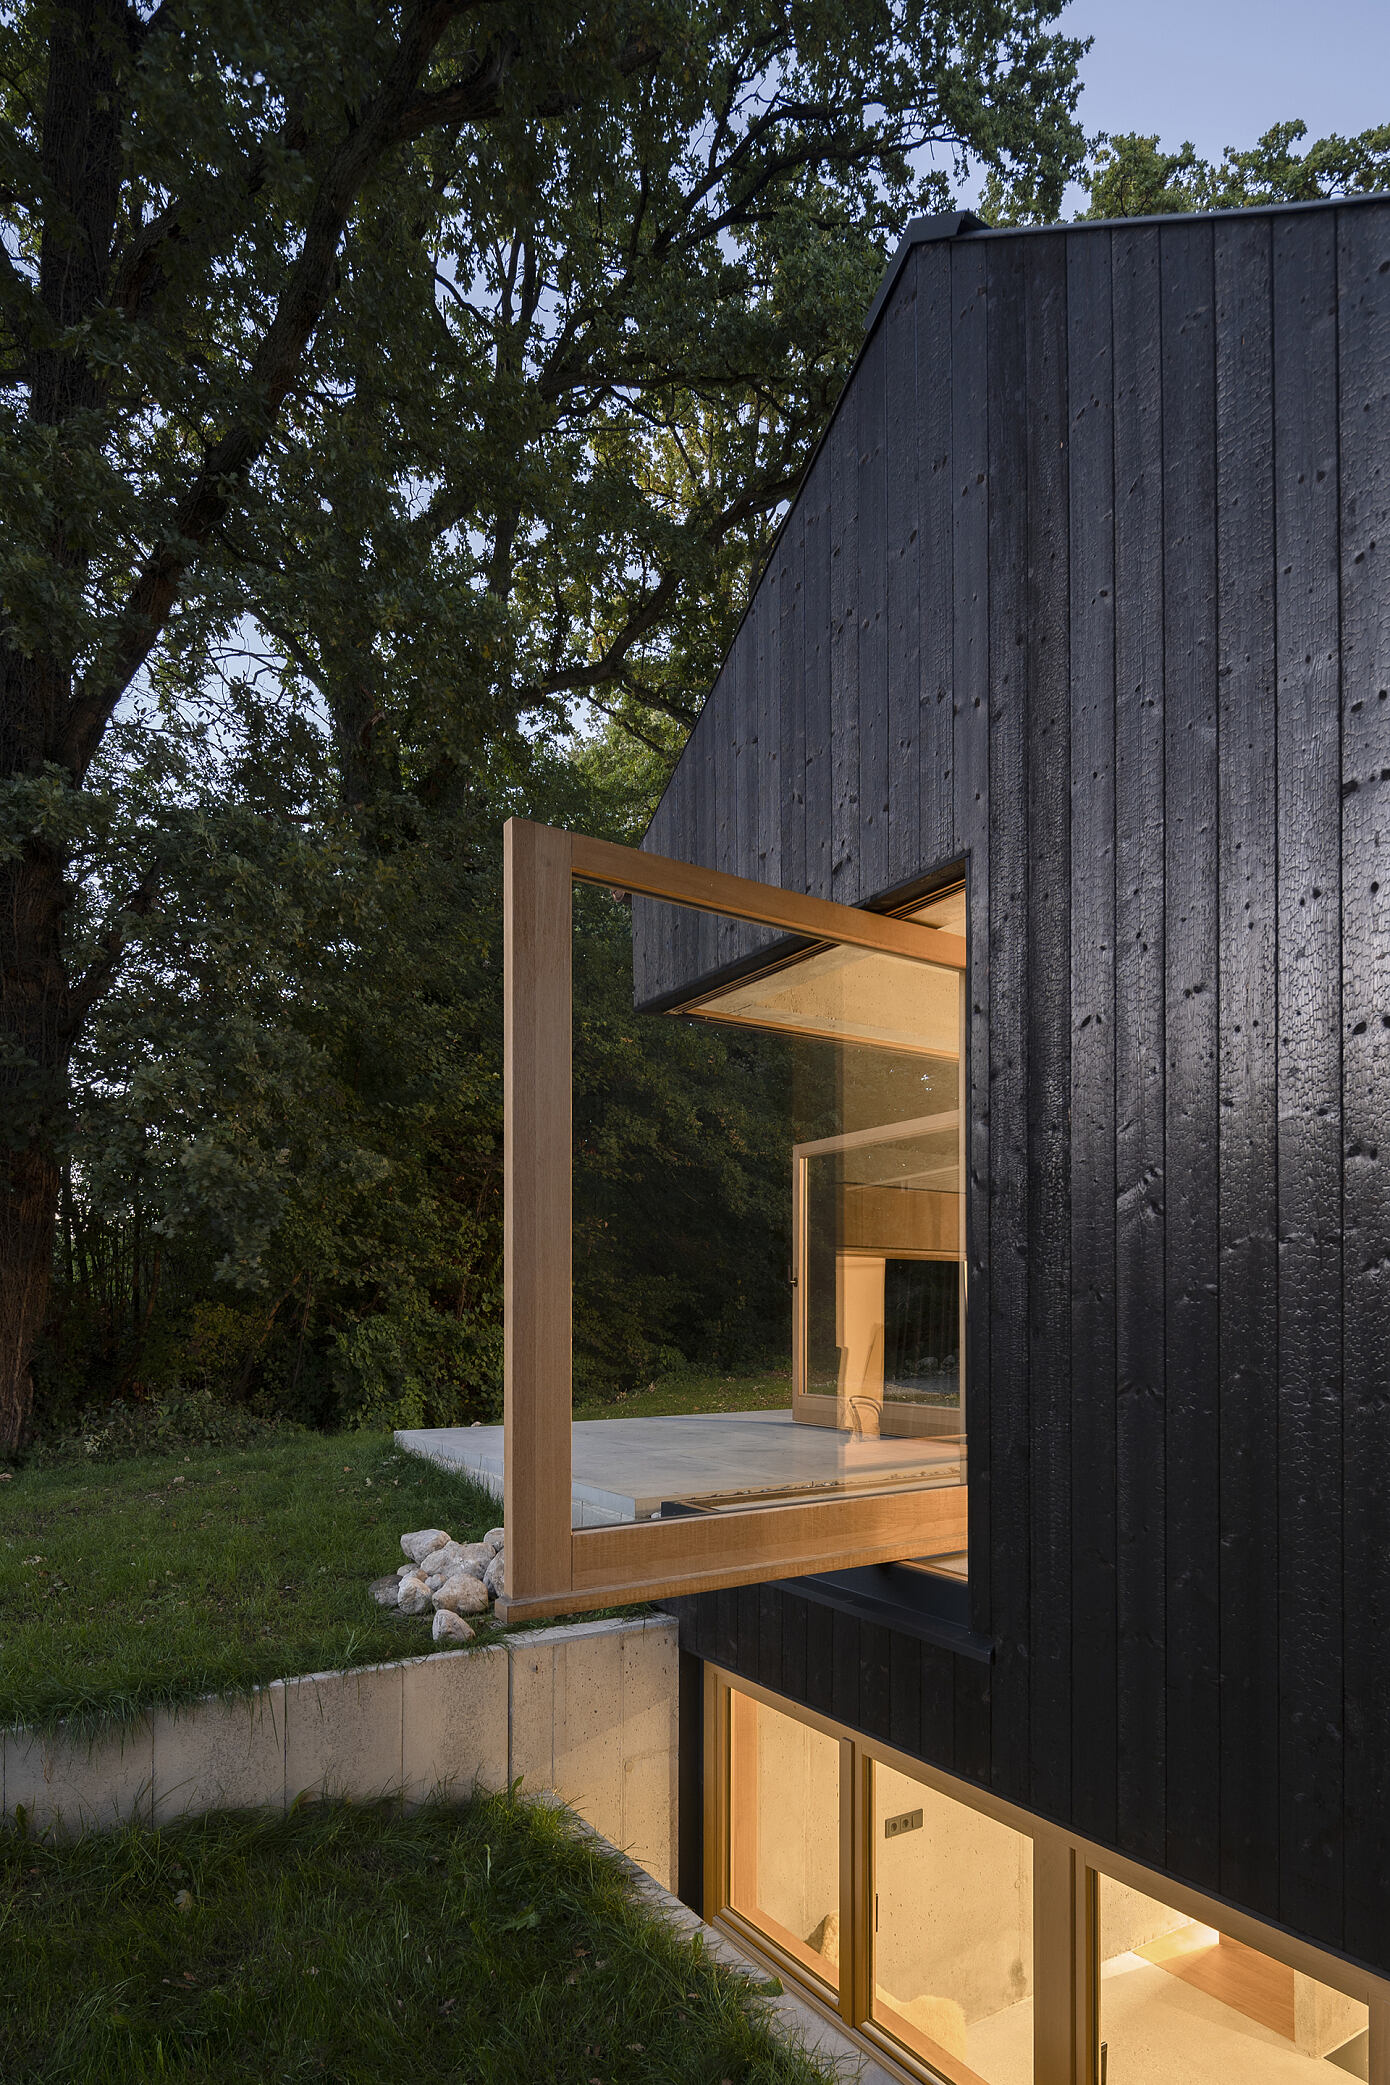 The Black House by Buero Wagner